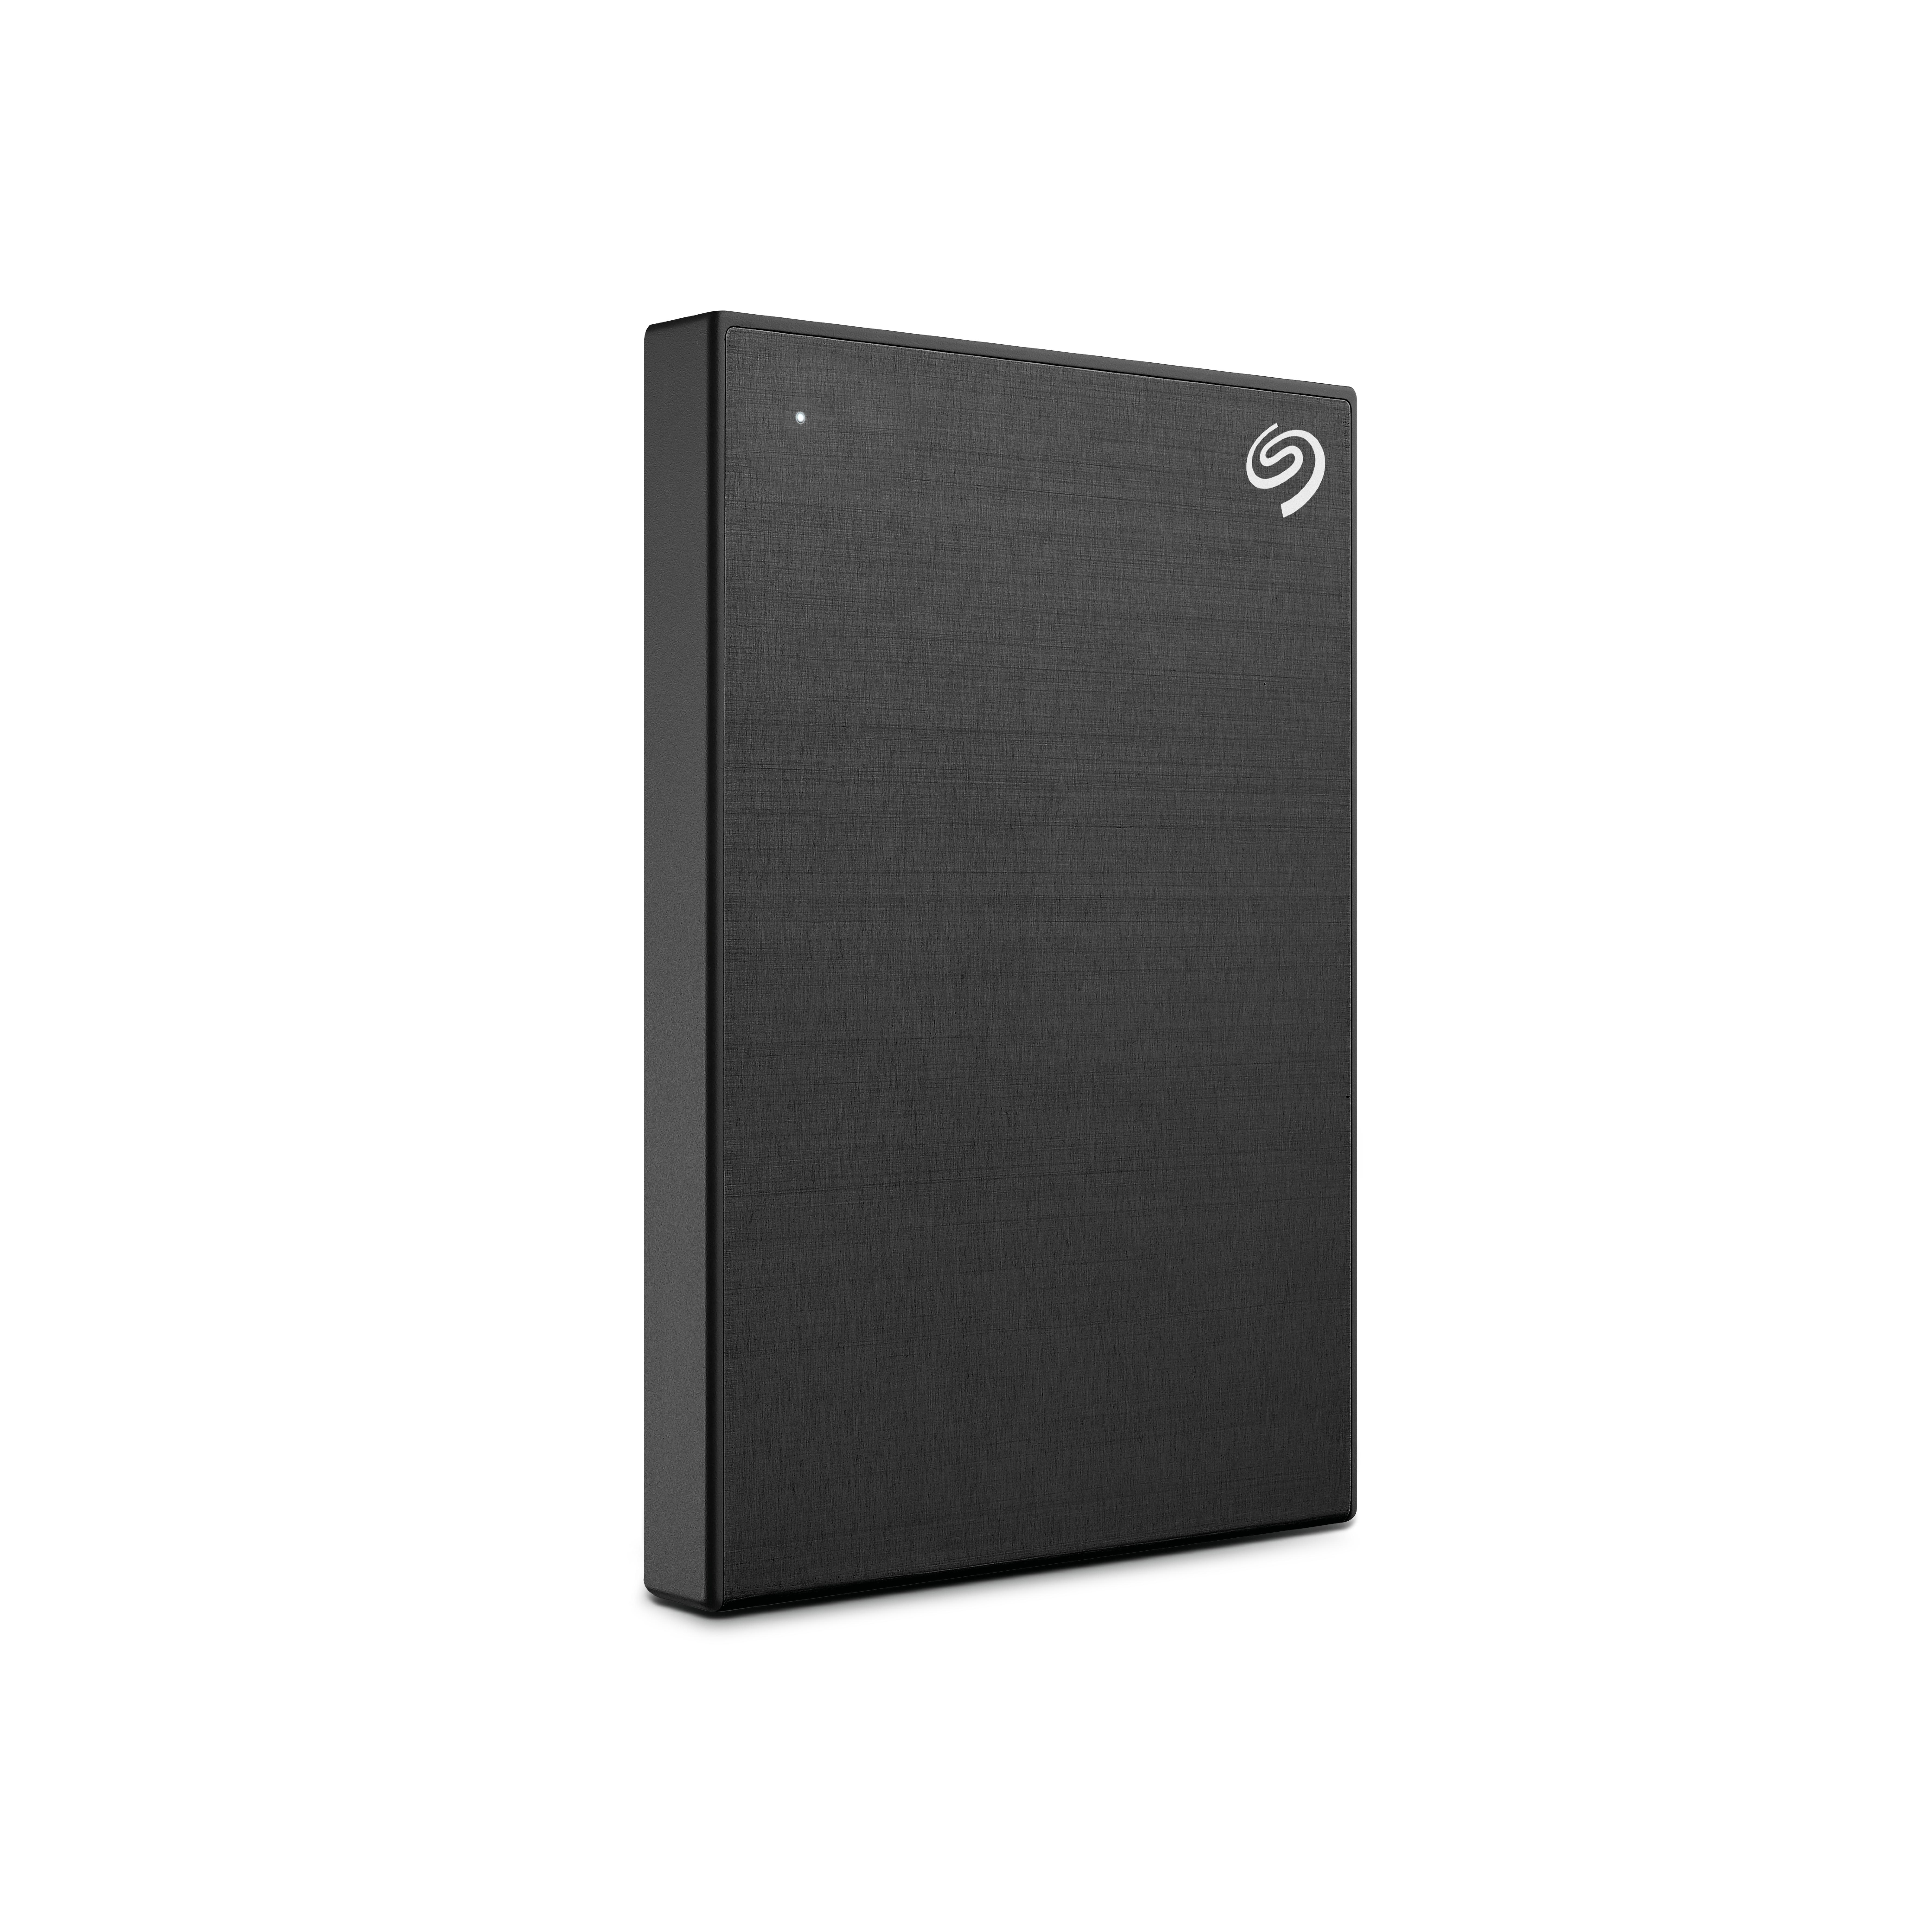 SEAGATE One Touch HDD, Schwarz Zoll, mobile 1 Festplatte, 2,5 extern, TB